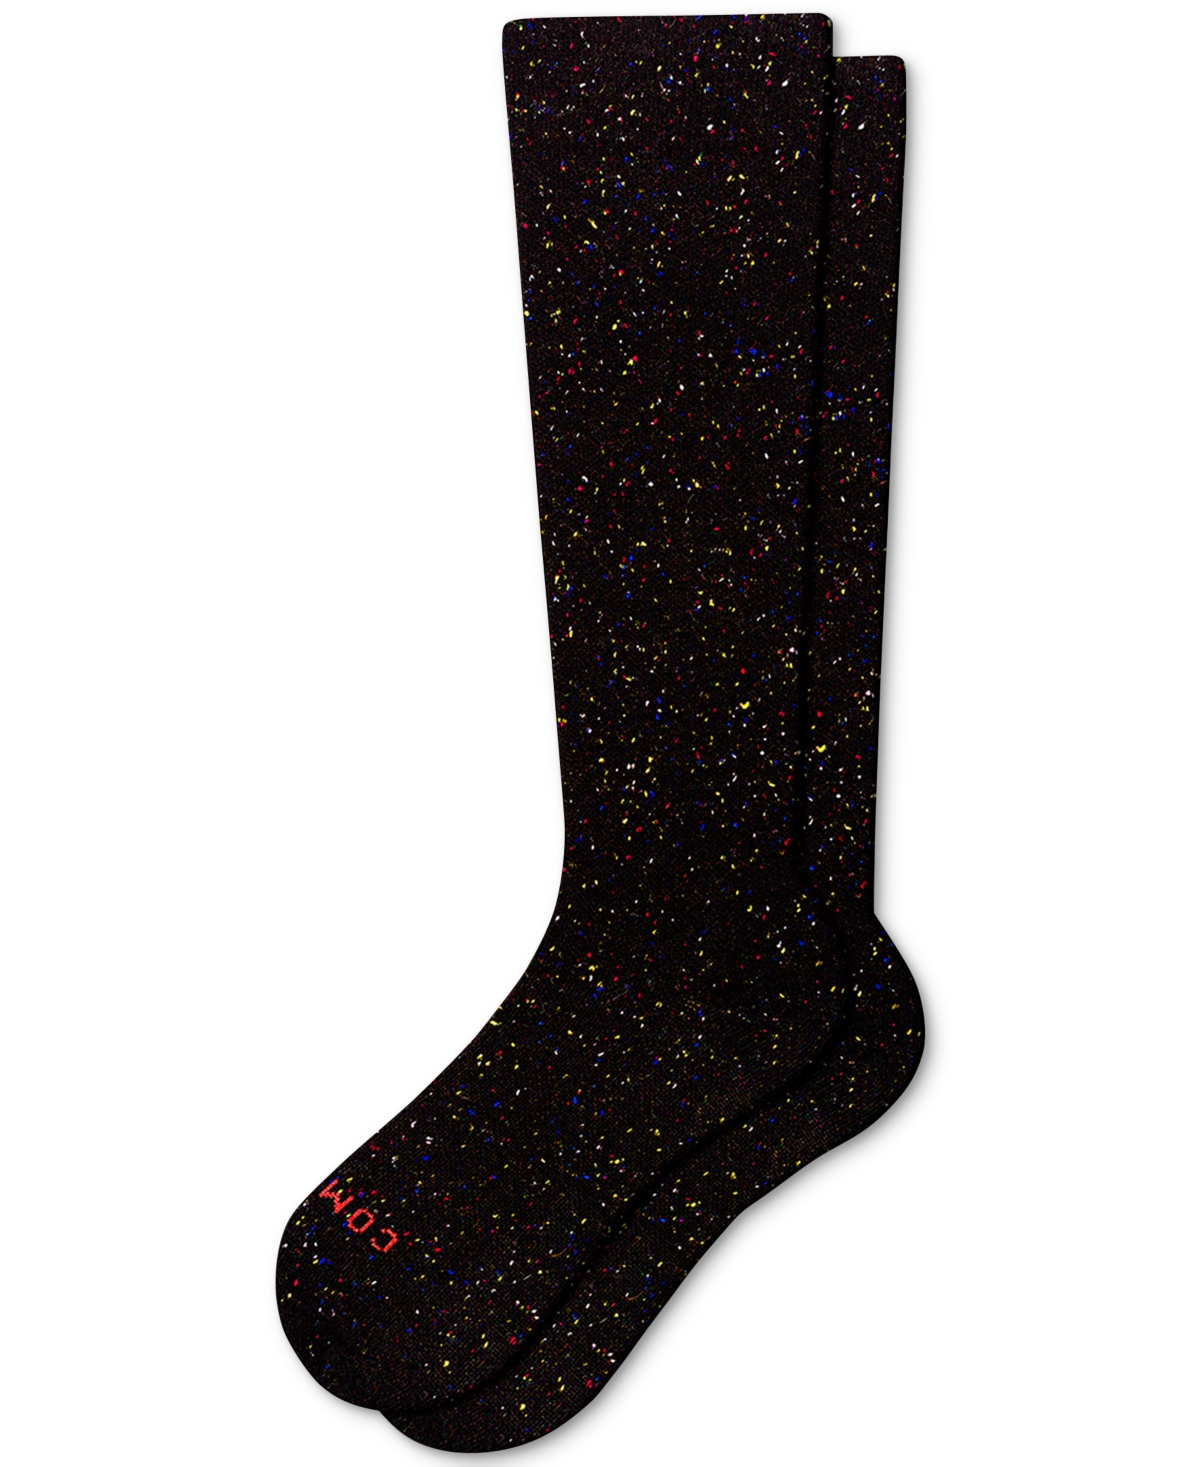 Comrad Knee-high Wicking Compression Socks In Galaxy